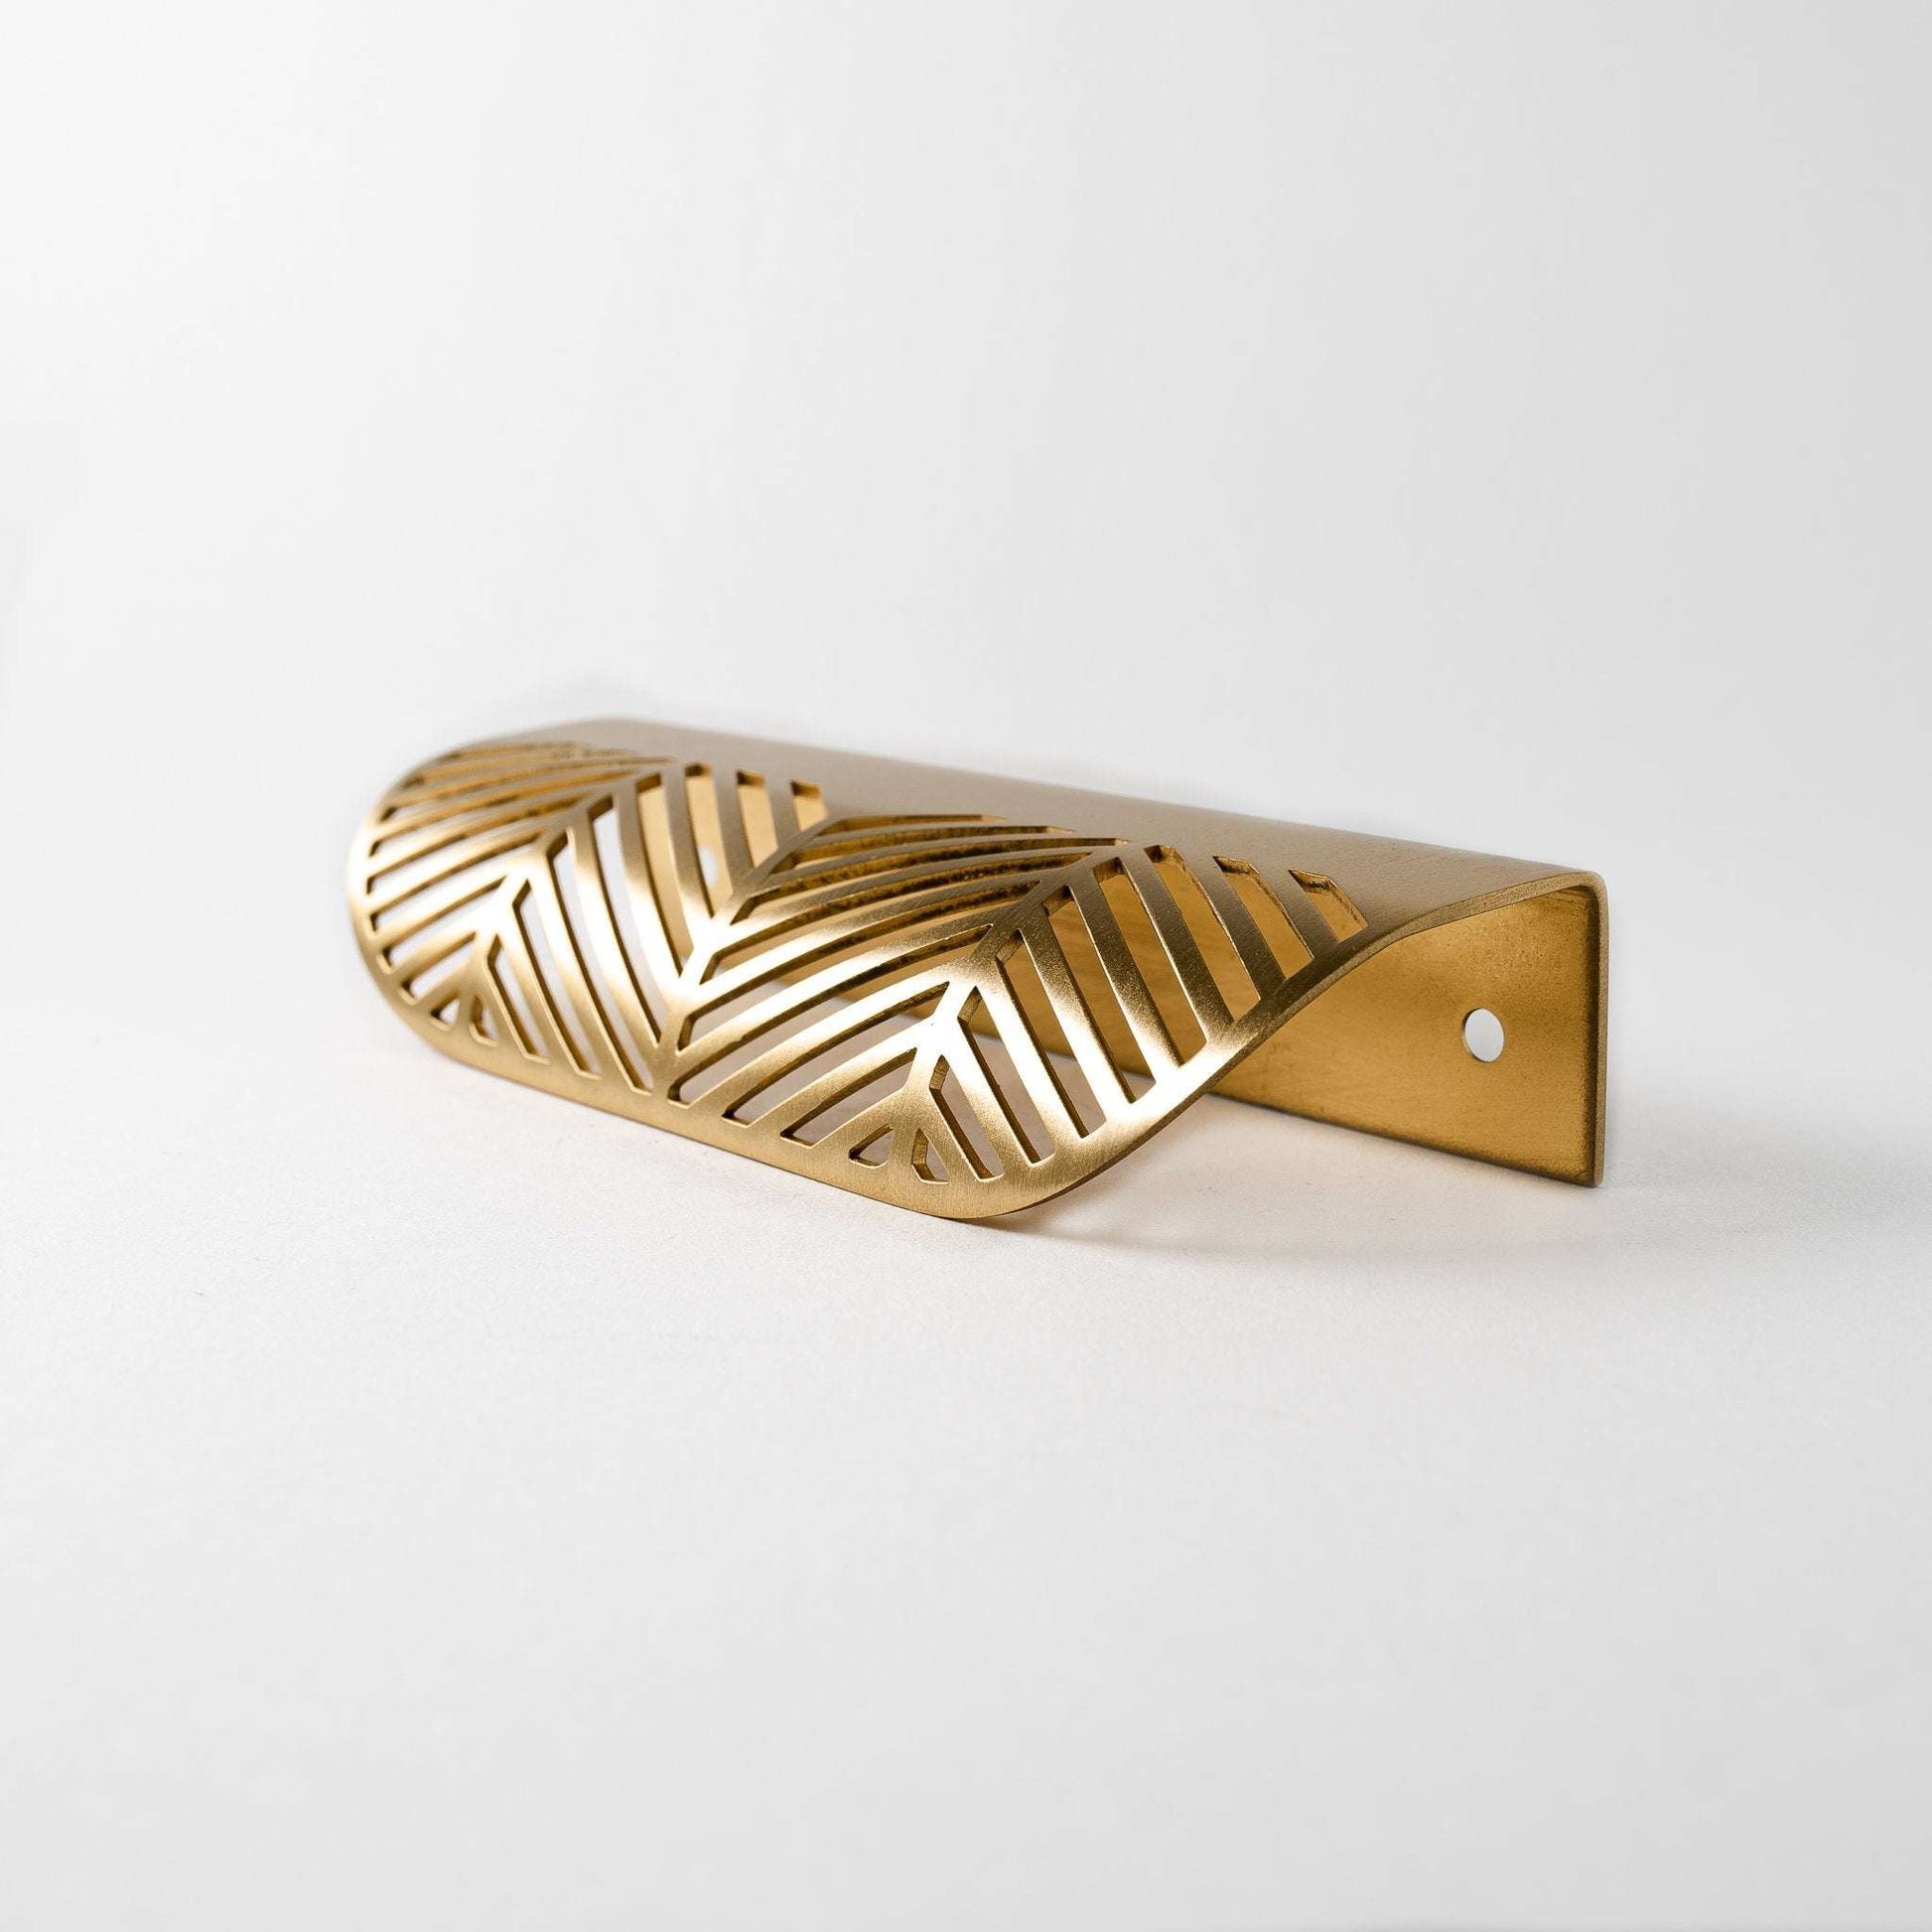 Frond, Solid Brass Edge Pulls


Frond Pull is a favorite on cabinetry in baths, laundry rooms and furniture pieces. Available in two sizes, this drawer pull offers a feminine touch and timeless pullFrond, Solid Brass Edge Pulls